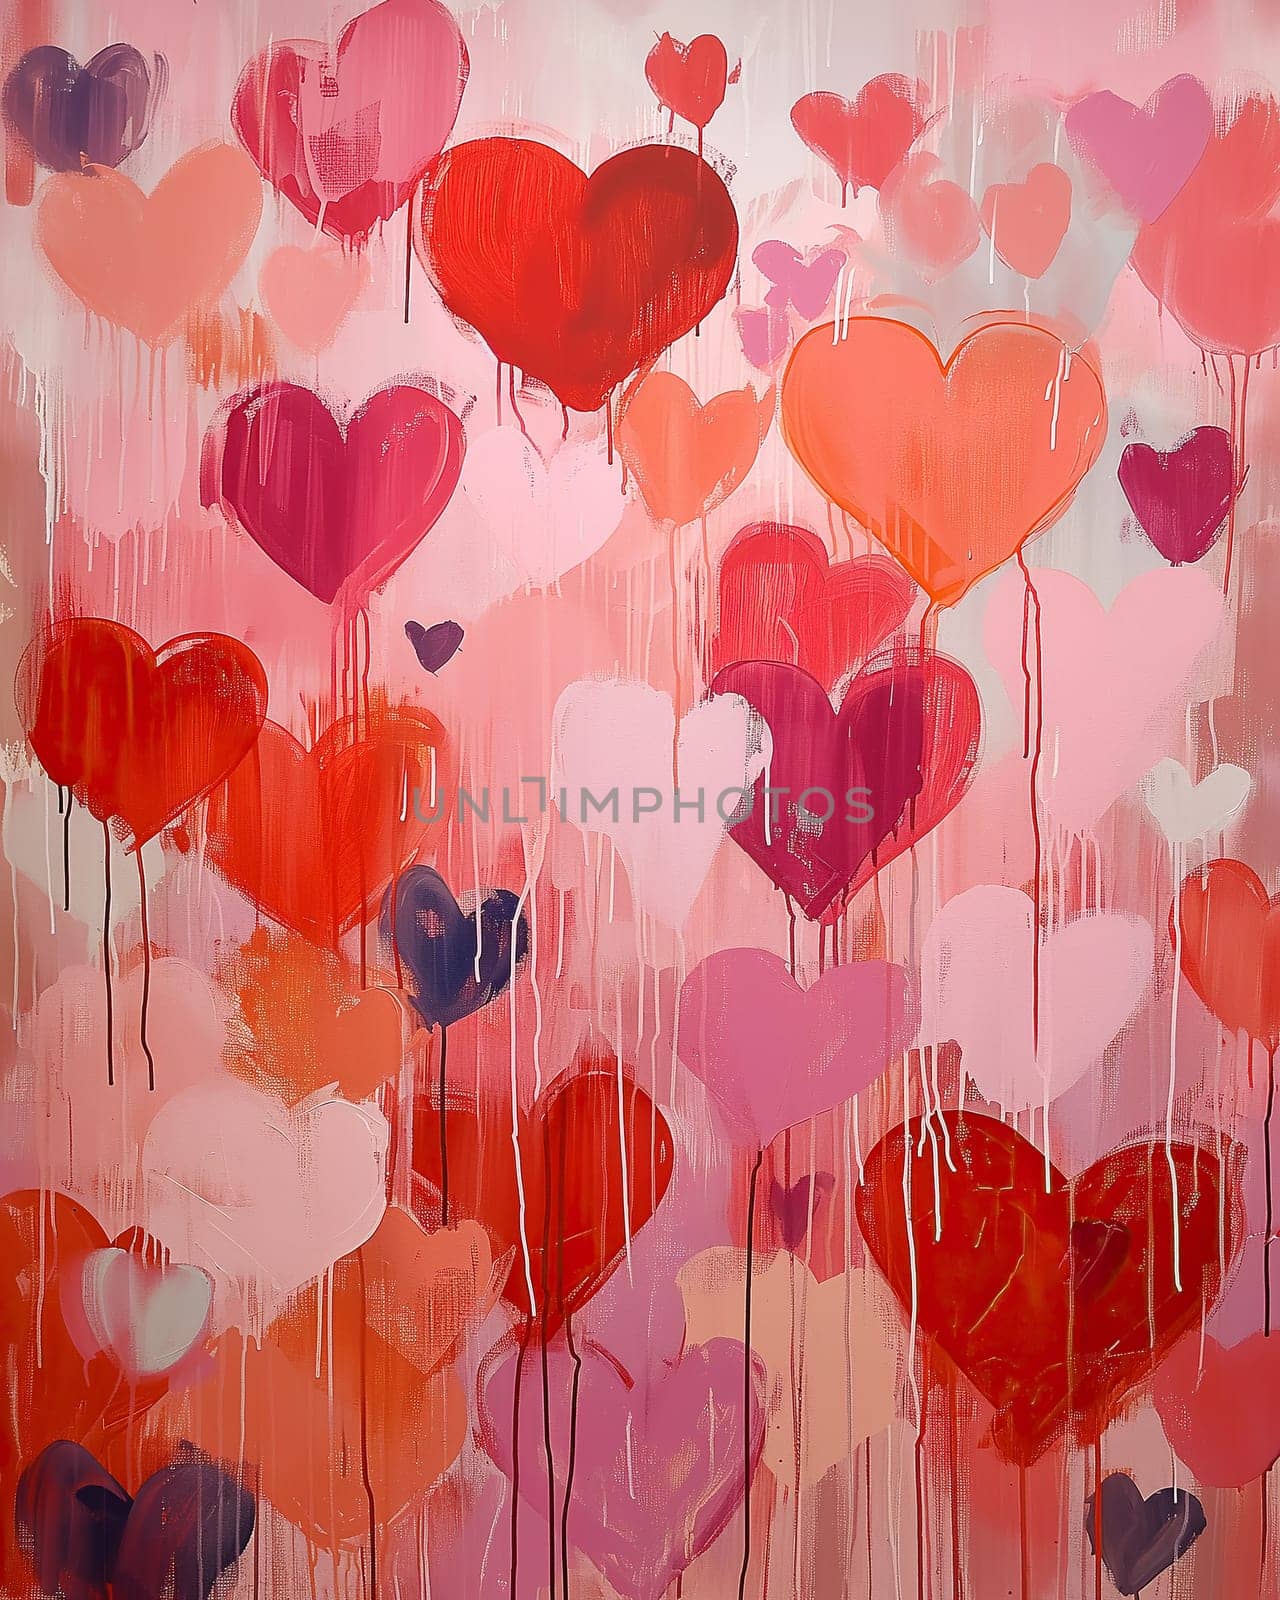 Colorful Hearts Abstract Painting by dimol